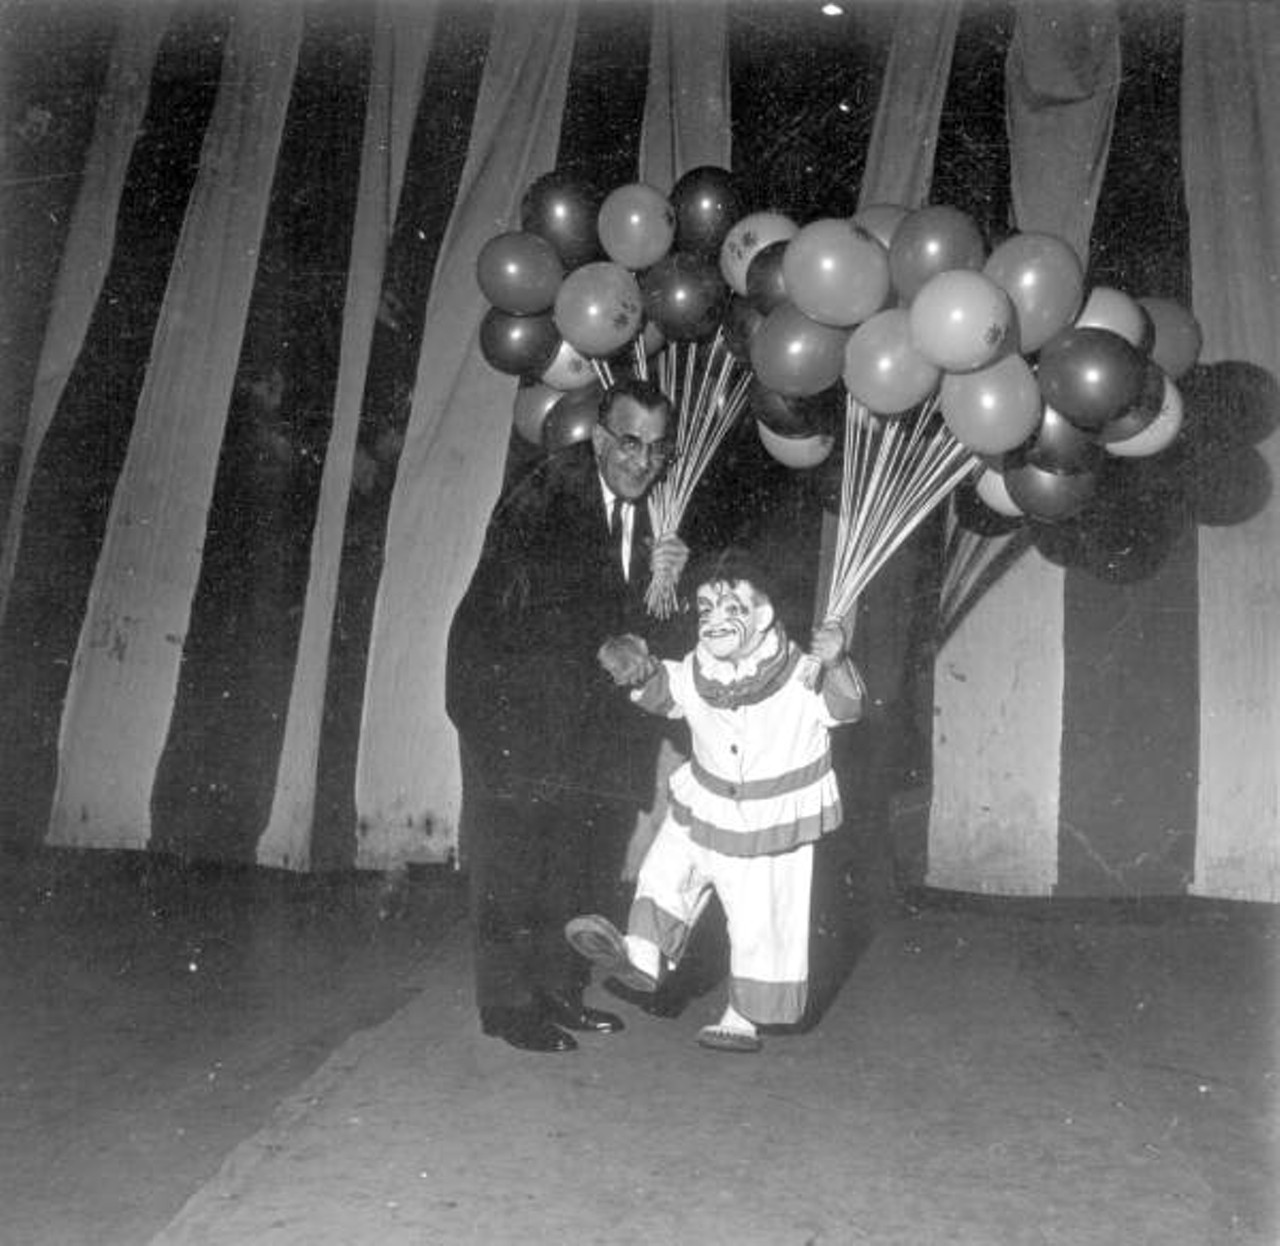 A small clown with balloons (via floridamemory.com)